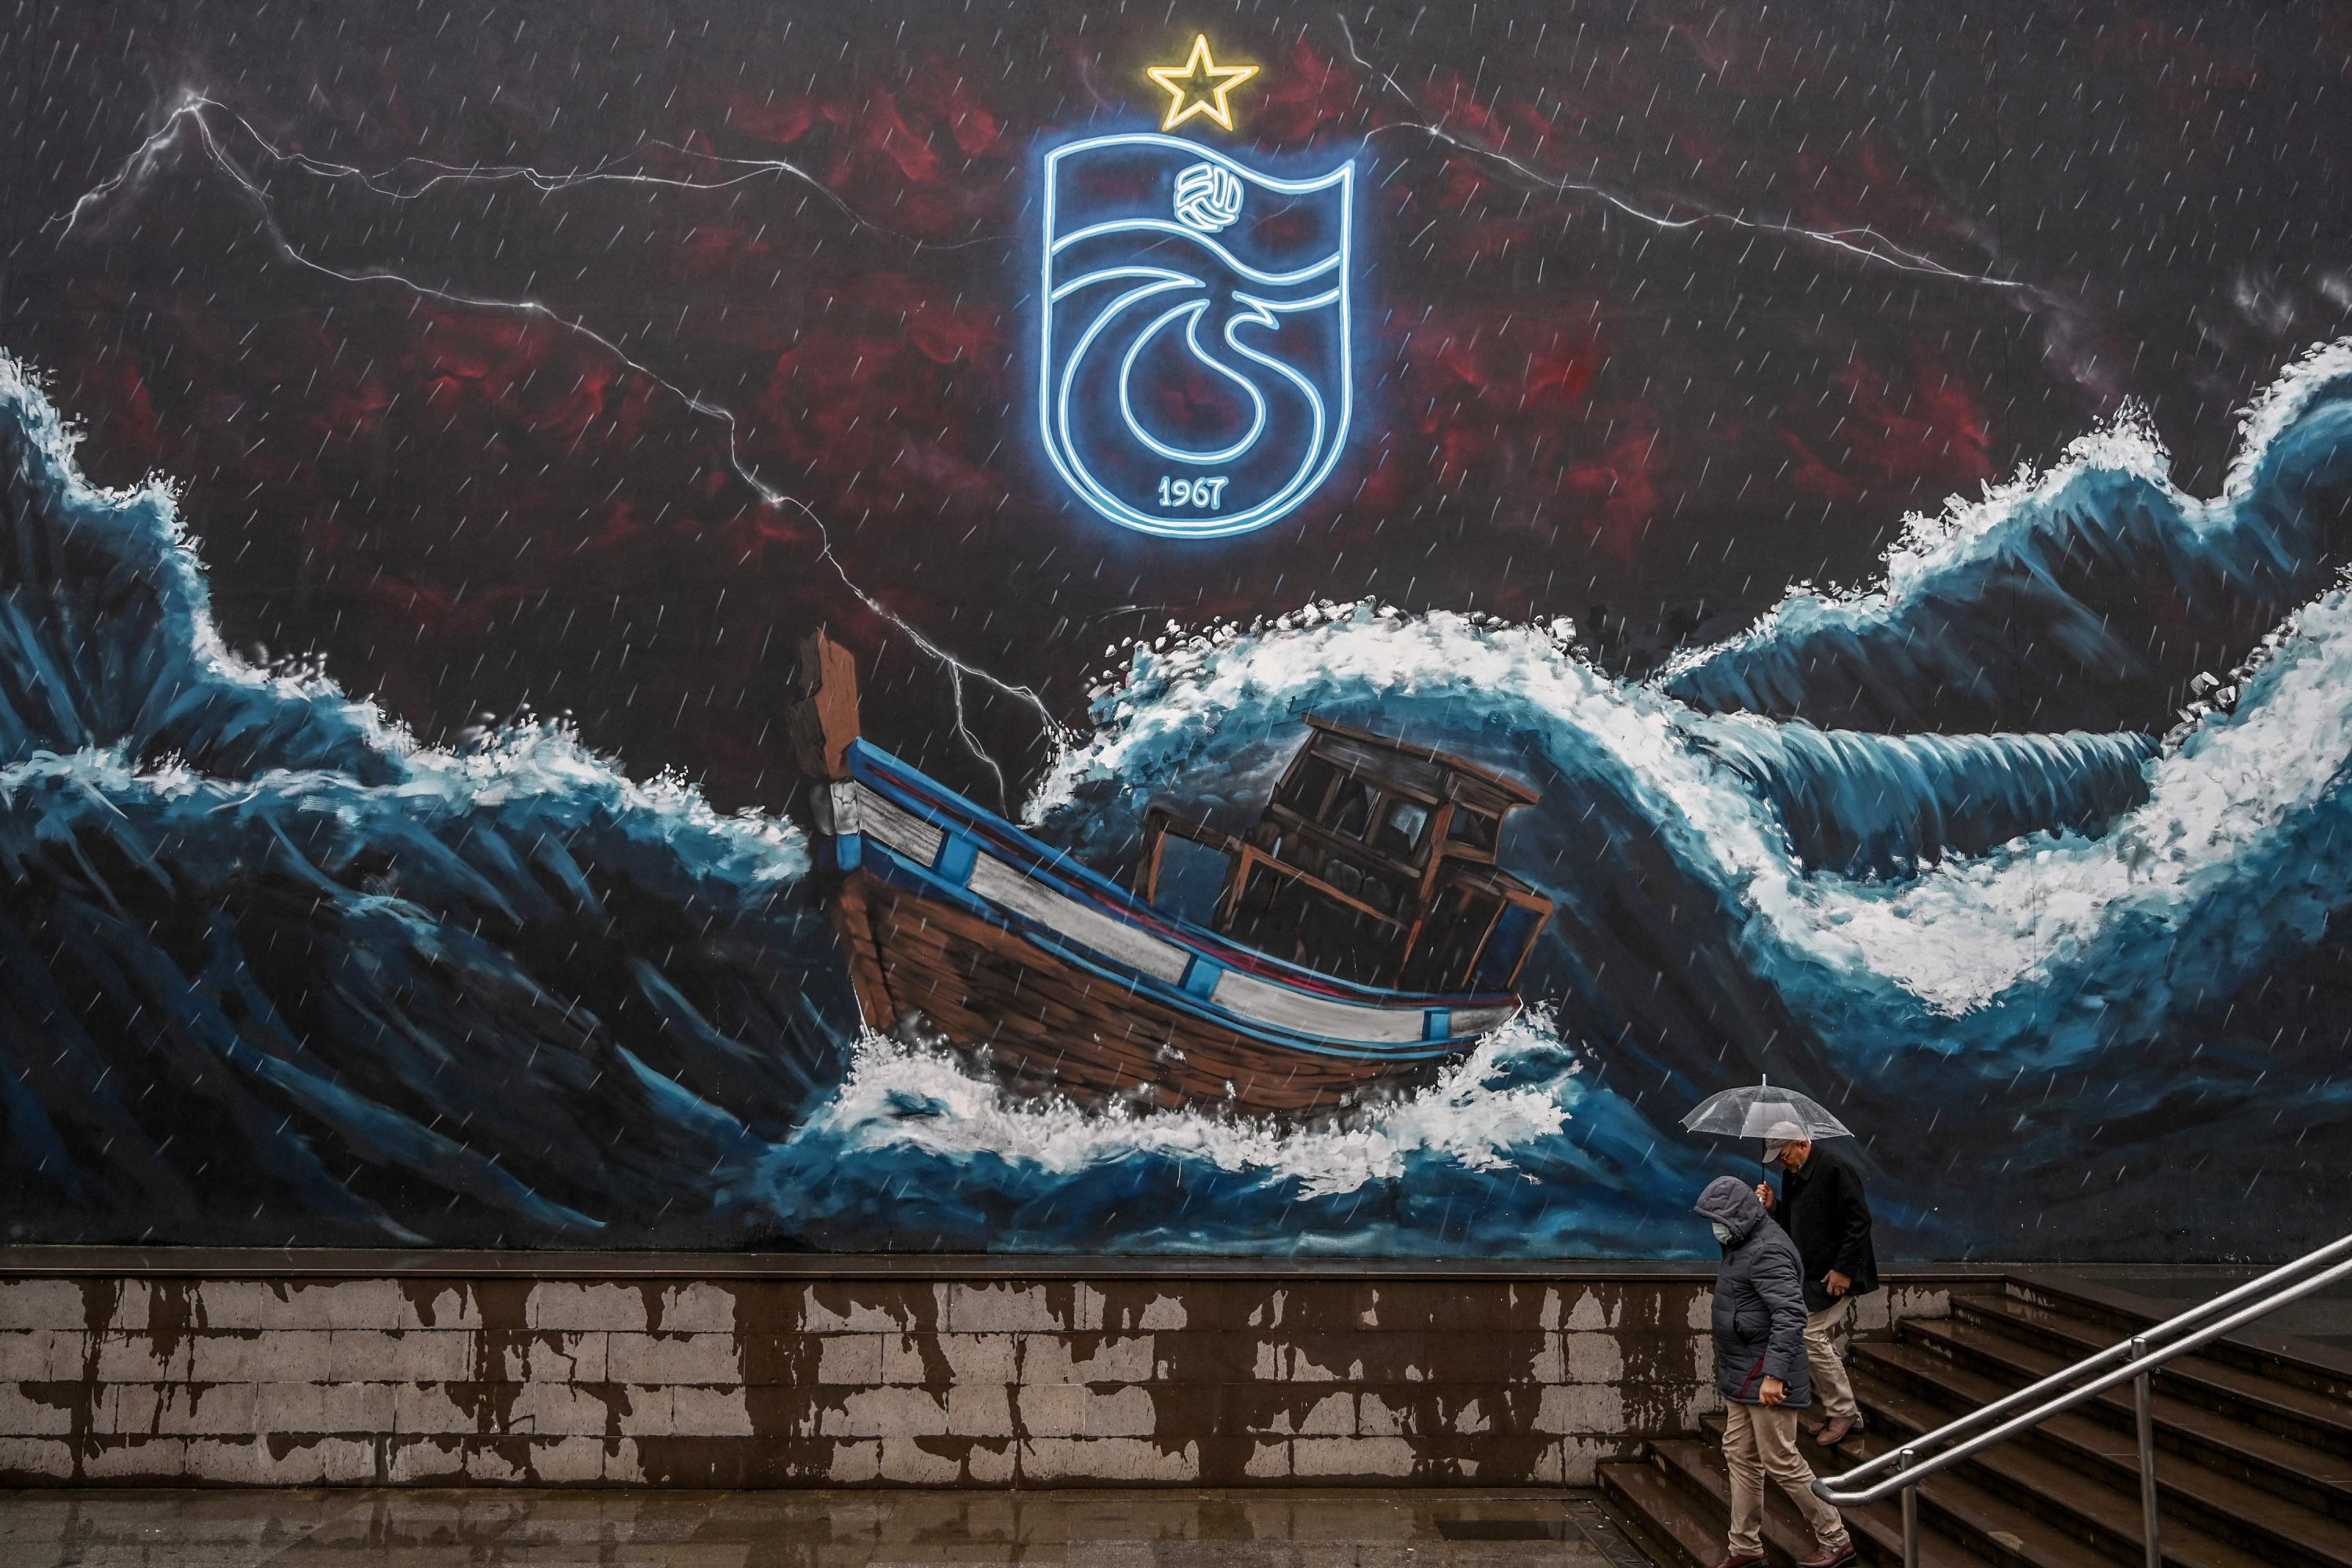 Pedestrians walk past a giant graffiti of the Trabzonspor club in Trabzon, Turkey, Dec. 18, 2021. (AFP Photo)